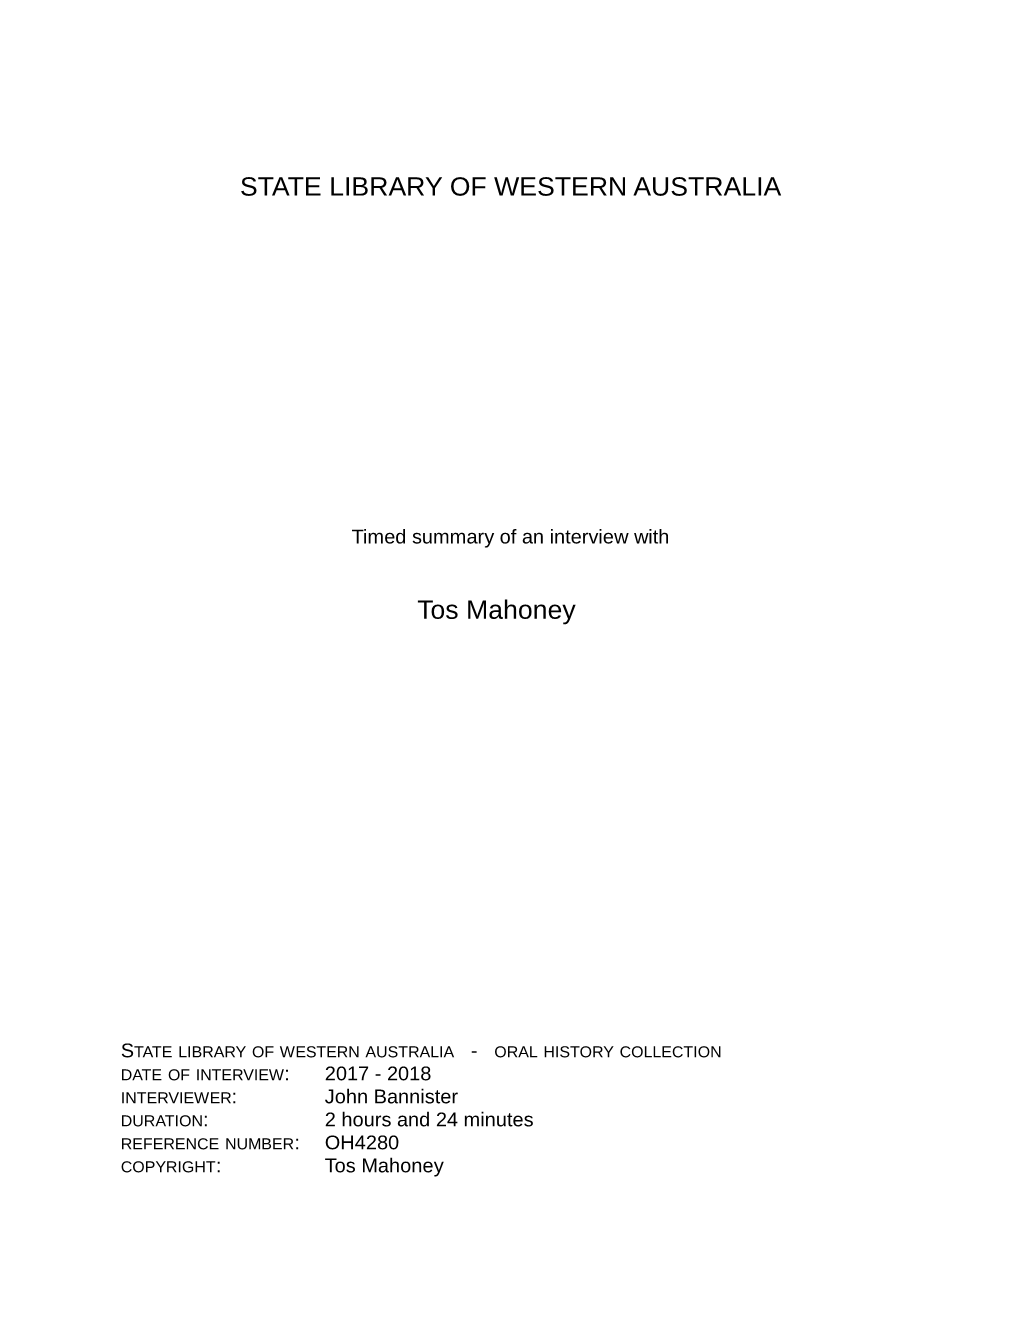 STATE LIBRARY of WESTERN AUSTRALIA Tos Mahoney